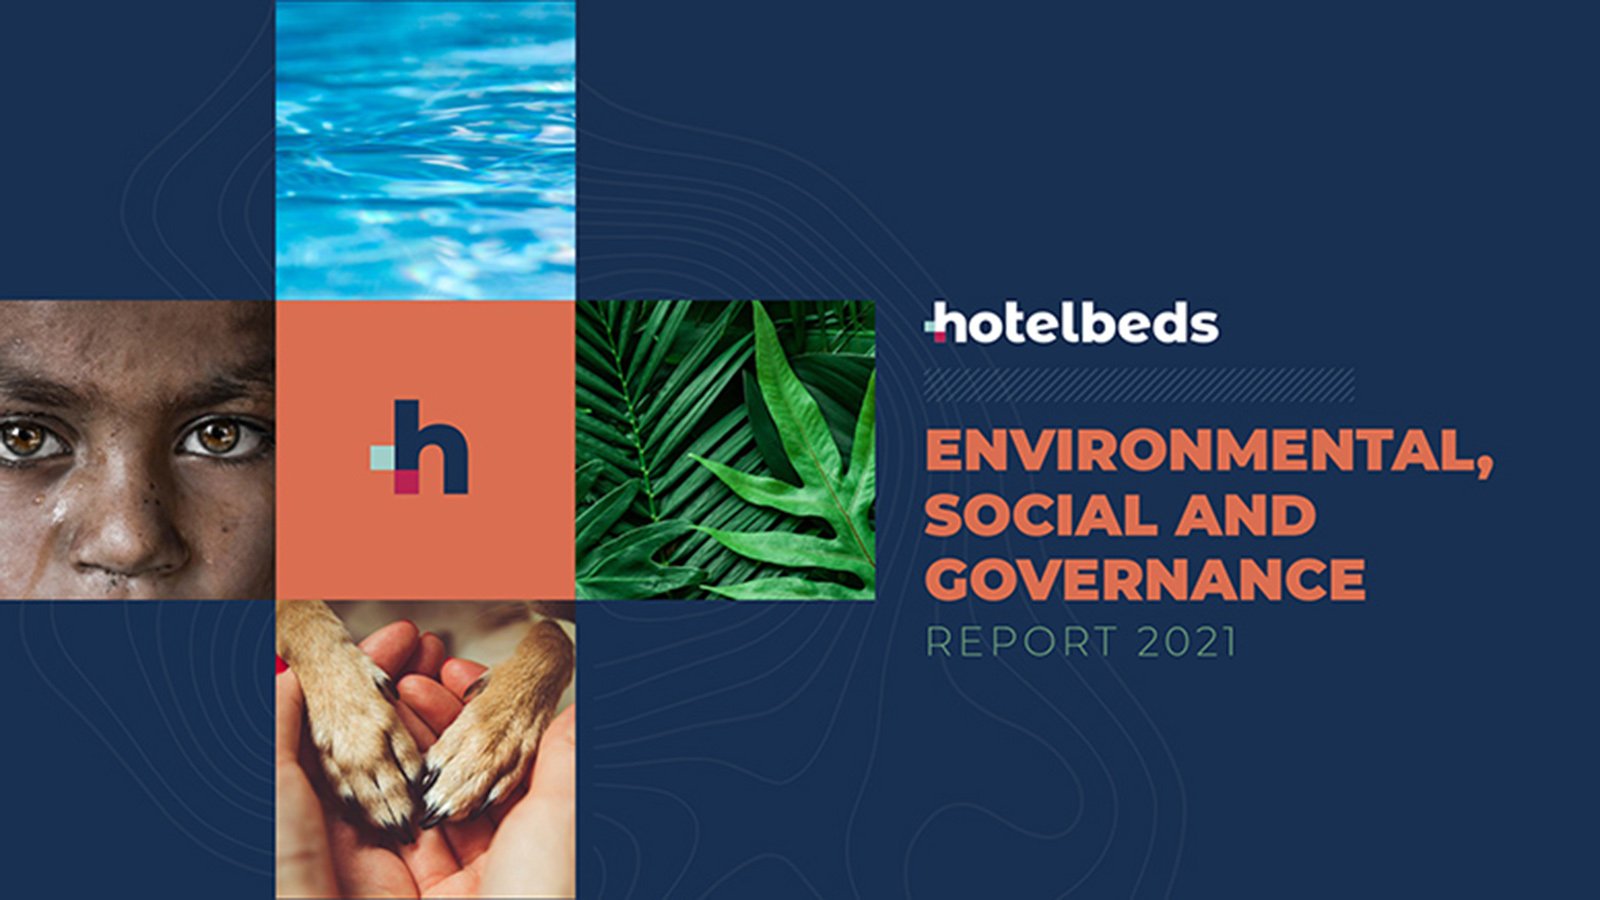 Hotelbeds Environmental Social and Governance Report